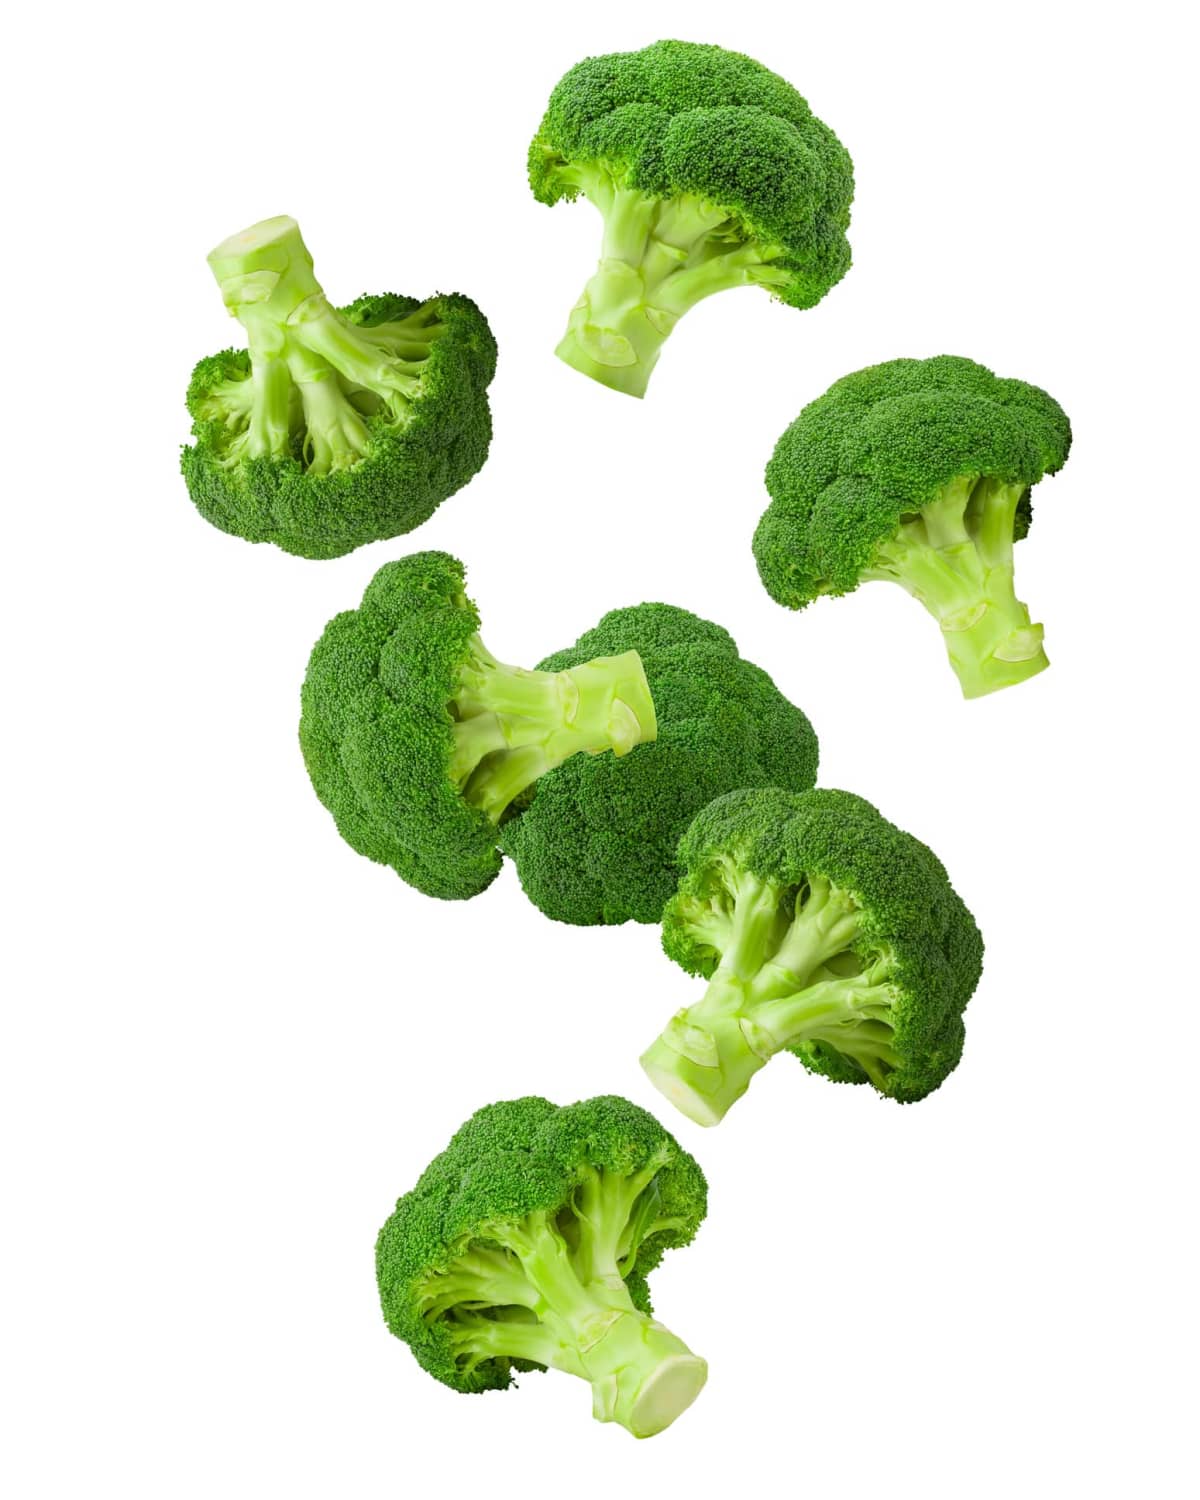 Chopped pieces of broccoli against a white background